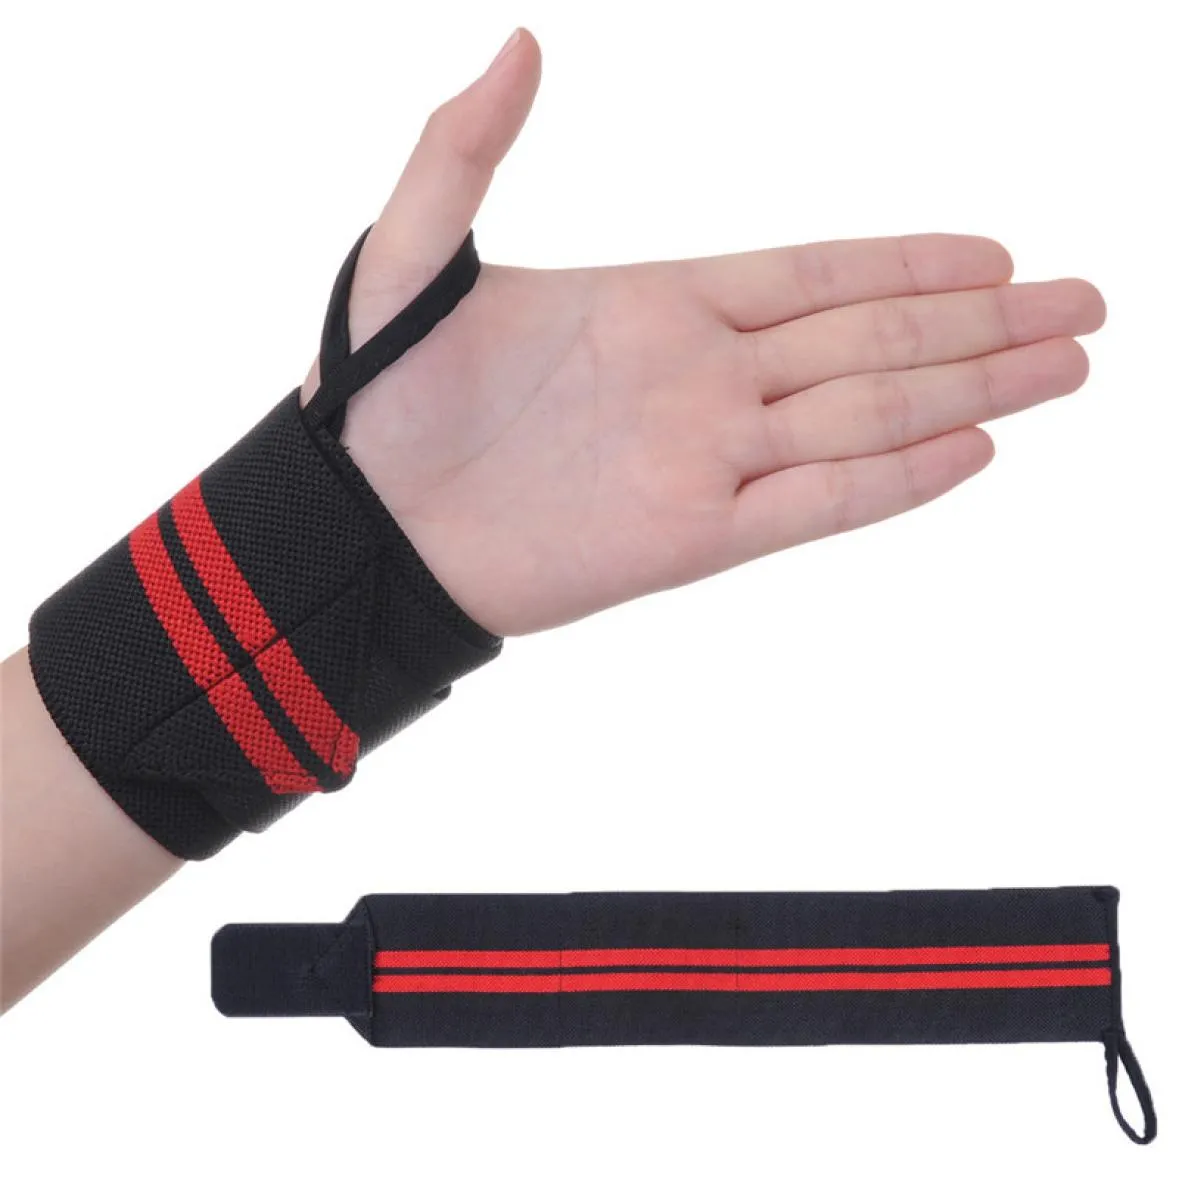 Thumb Loop Wrist Wrap Protection Wrist Exercise Support Protection Muscles Sports Bundled Wrist Strap Training Wristband4003696